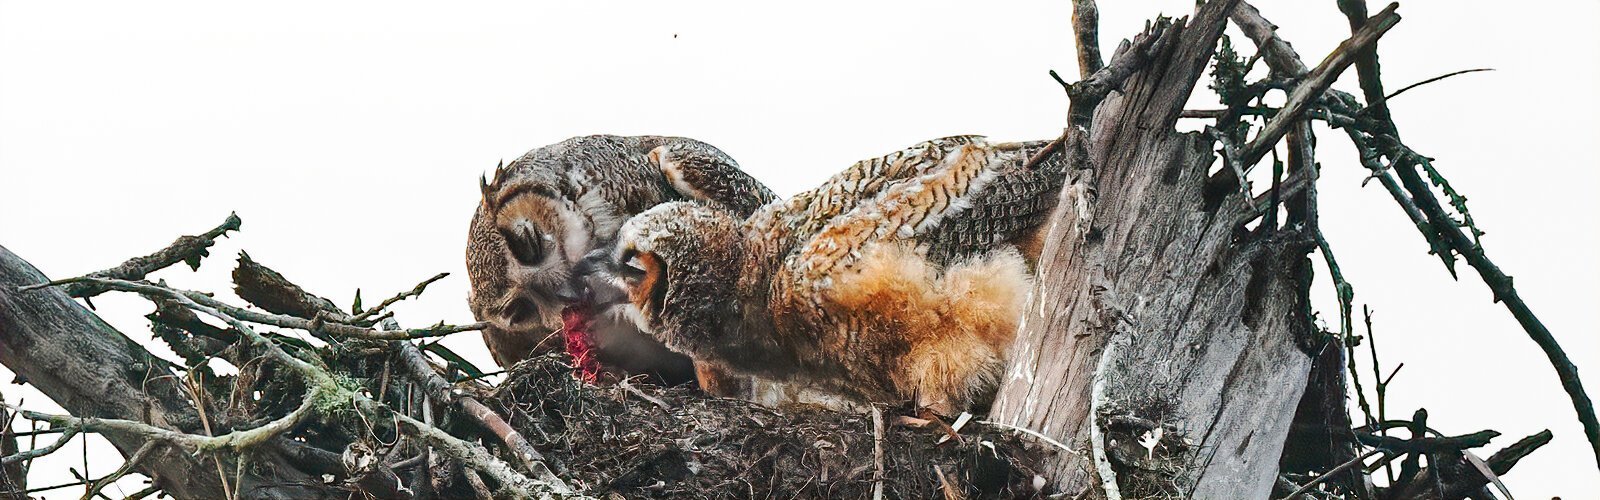 Great-horned owl mom and owlet feed on meat, probably a rodent, their main staple. Unfortunately, the use of rat poison has become a plague for owls across the U.S. as they often fall prey to secondary poisoning by eating poisoned rats.